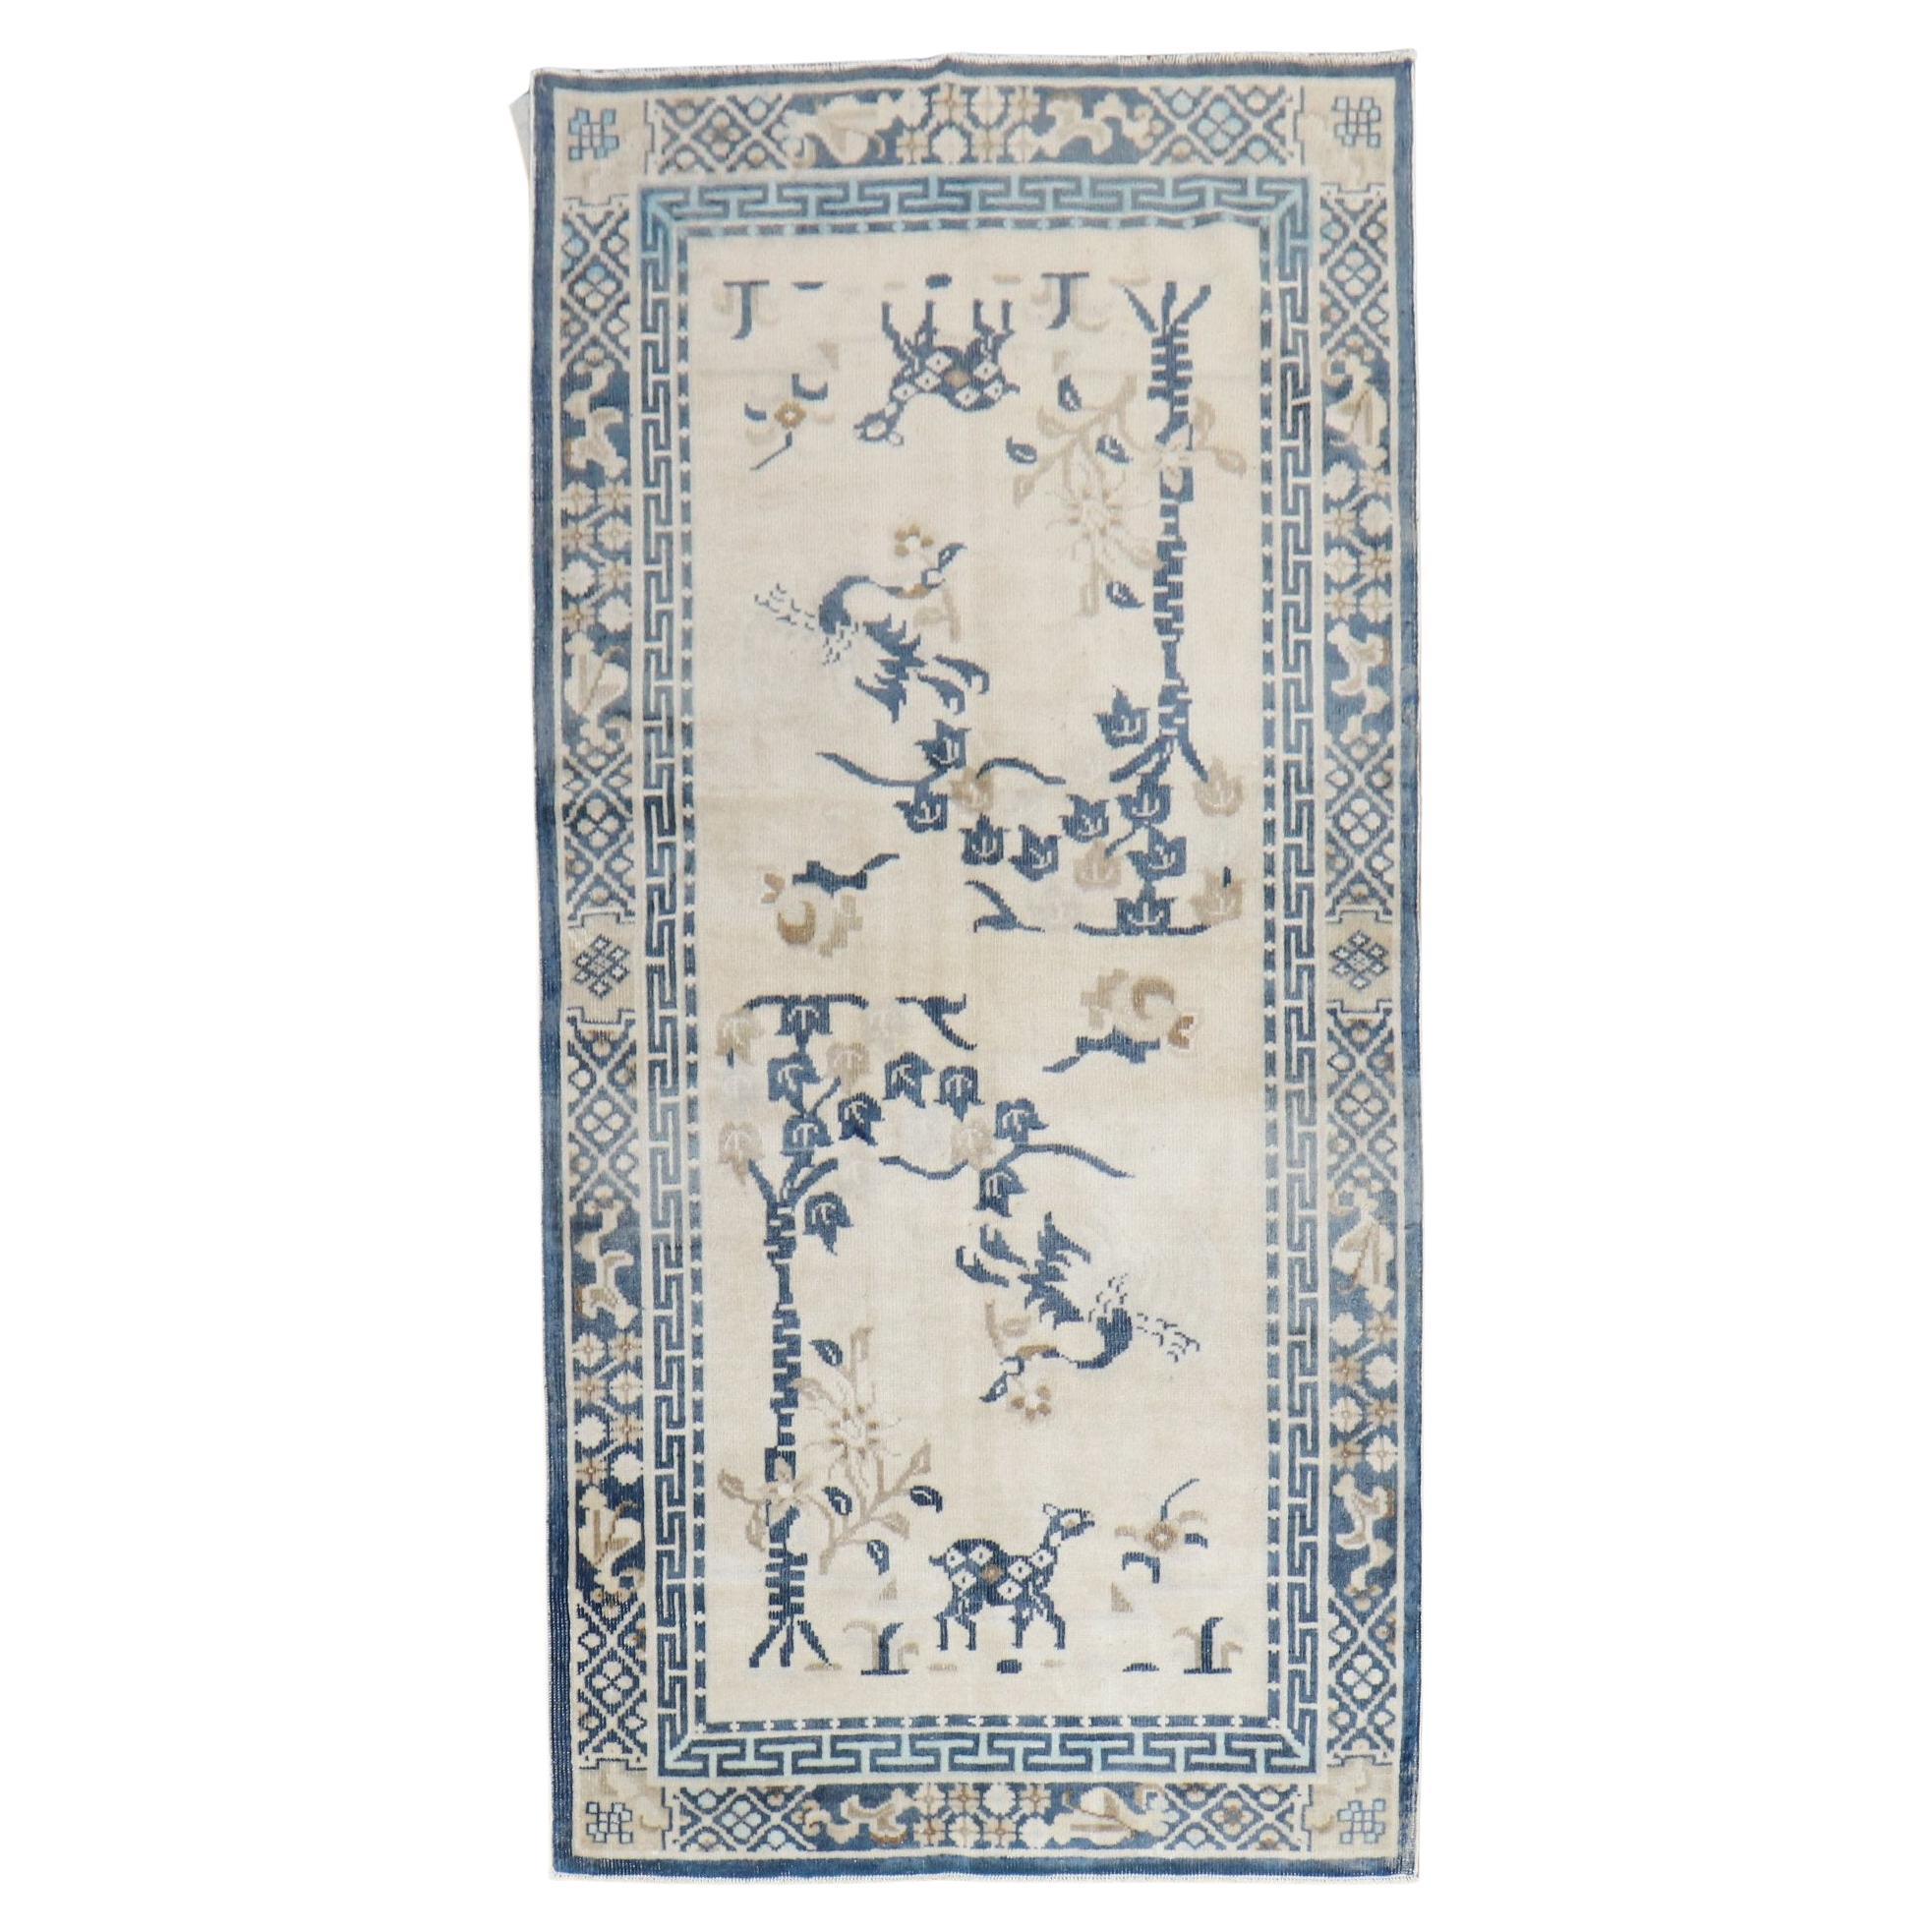 White Blue Color Pictorial Antique Chinese Oriental Rug